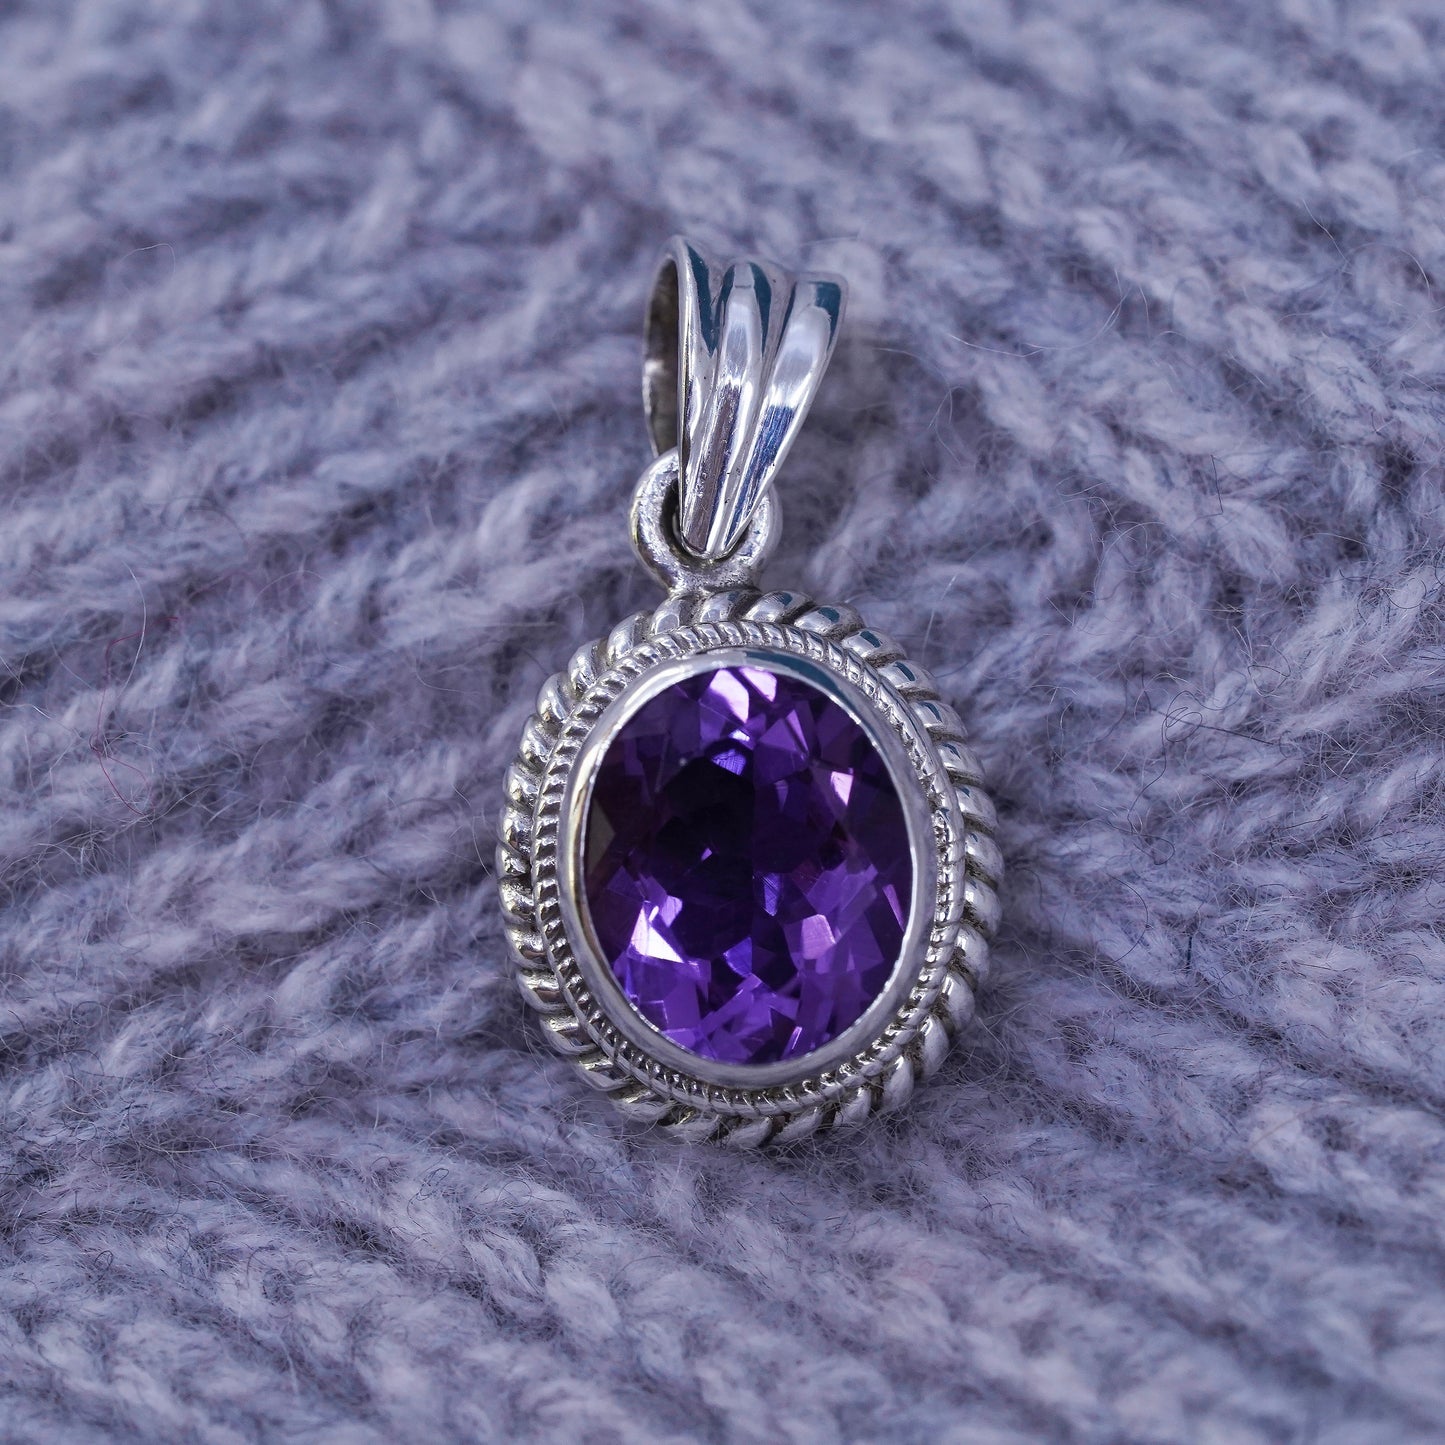 Vintage sterling 925 silver handmade pendant with amethyst and cz